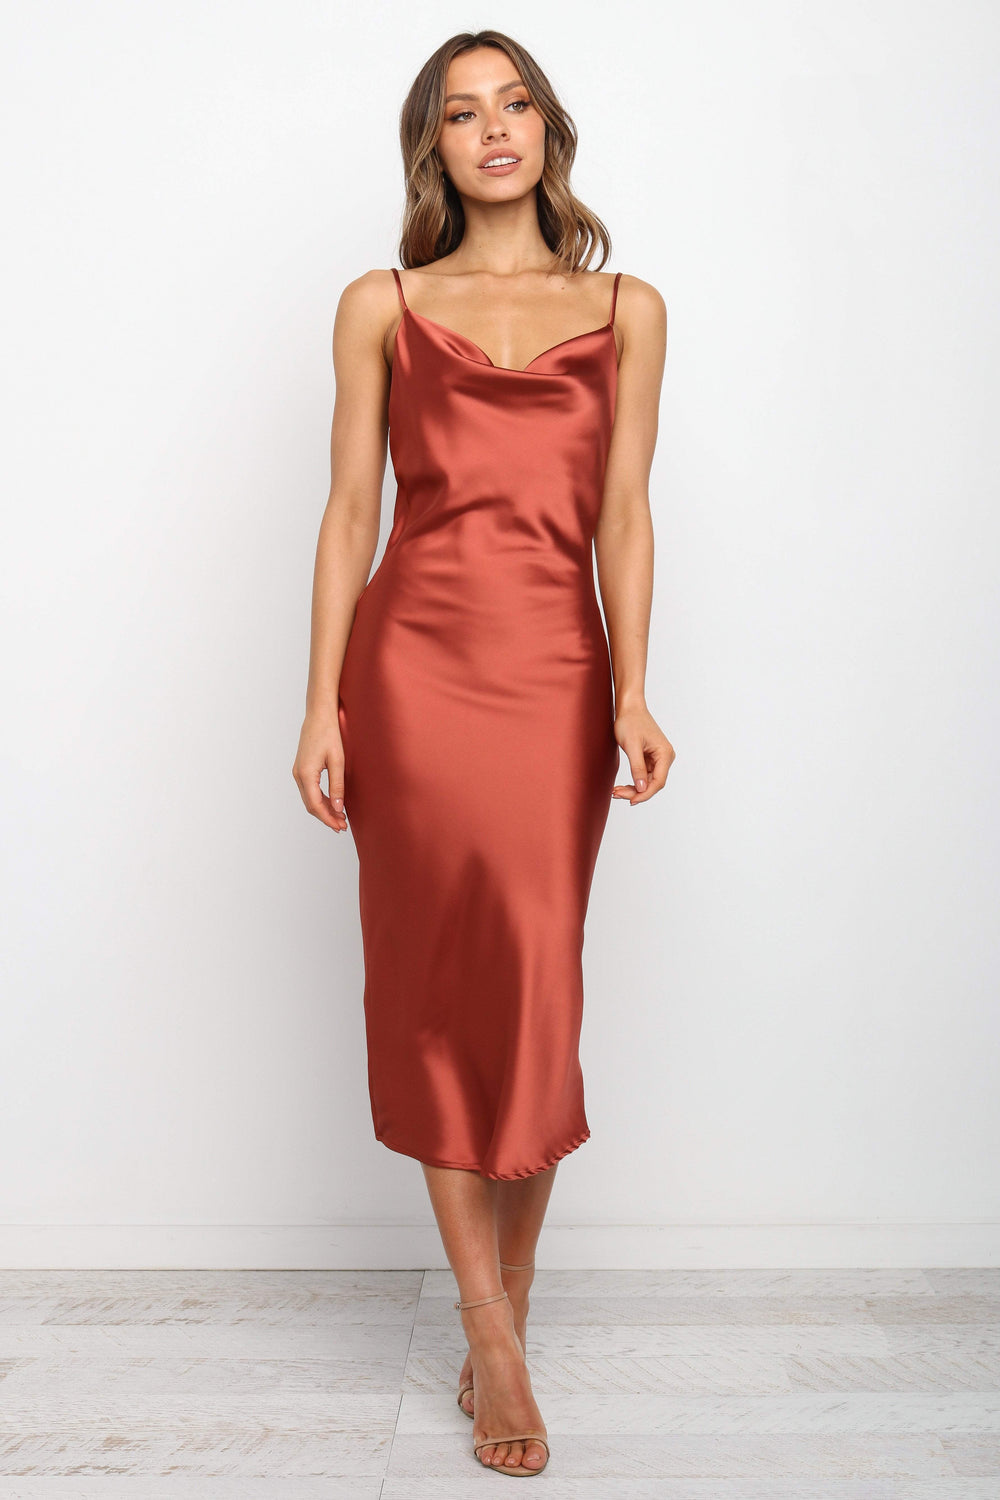 DRESSES Persia Dress - Rust  Stunning cowl neck, midi dress with adjustable straps in a sexy satin fabrication. Offering a flattering feminine silhouette that can be dressed up or dressed down. Perfect for weddings, date nights, Spring parties, brunch, day events, and more.  Perfect that Y2K look. 